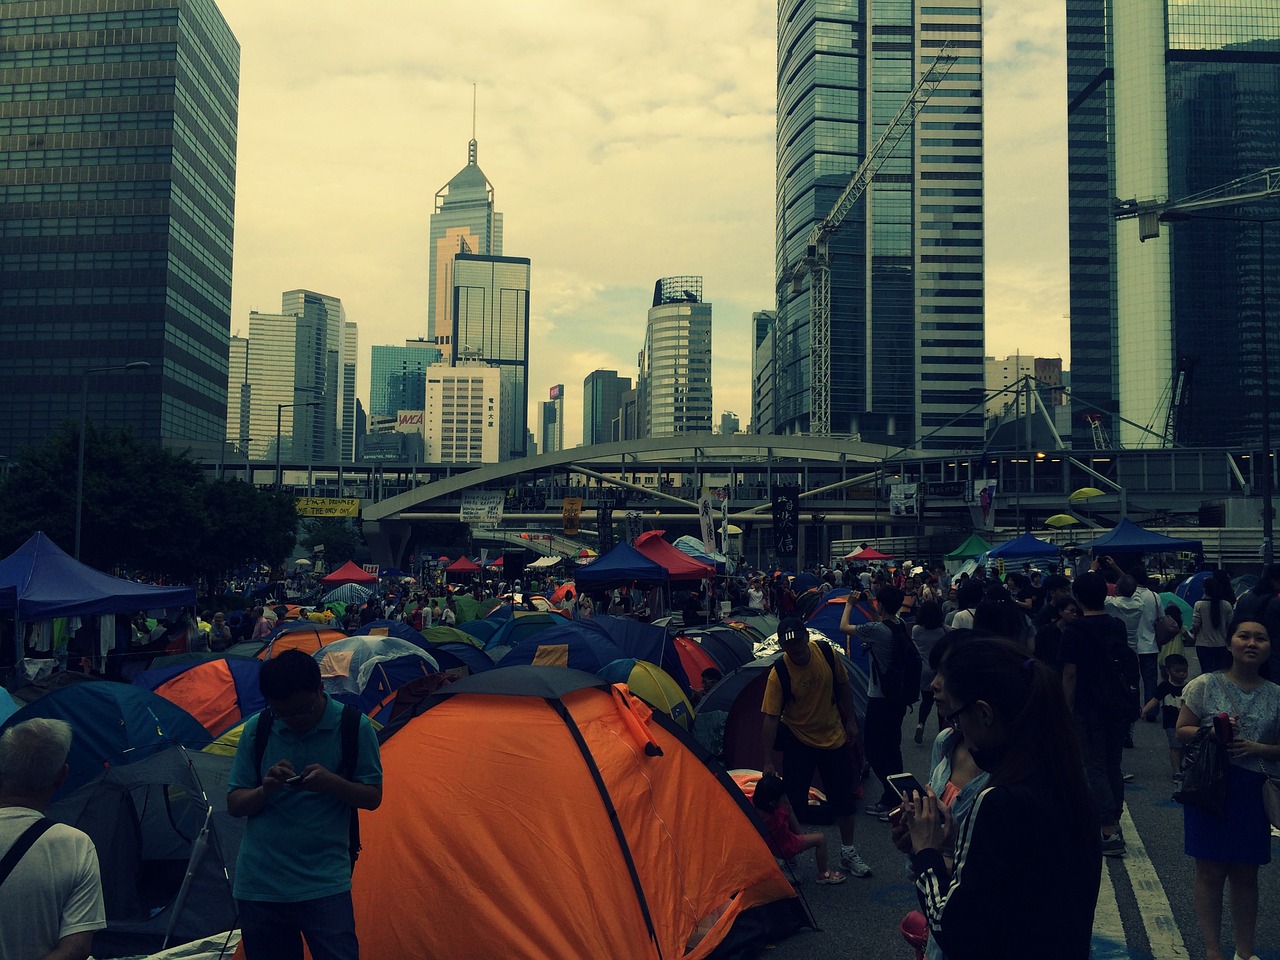 Hong Kong demonstrators protest against proposed extradition bill